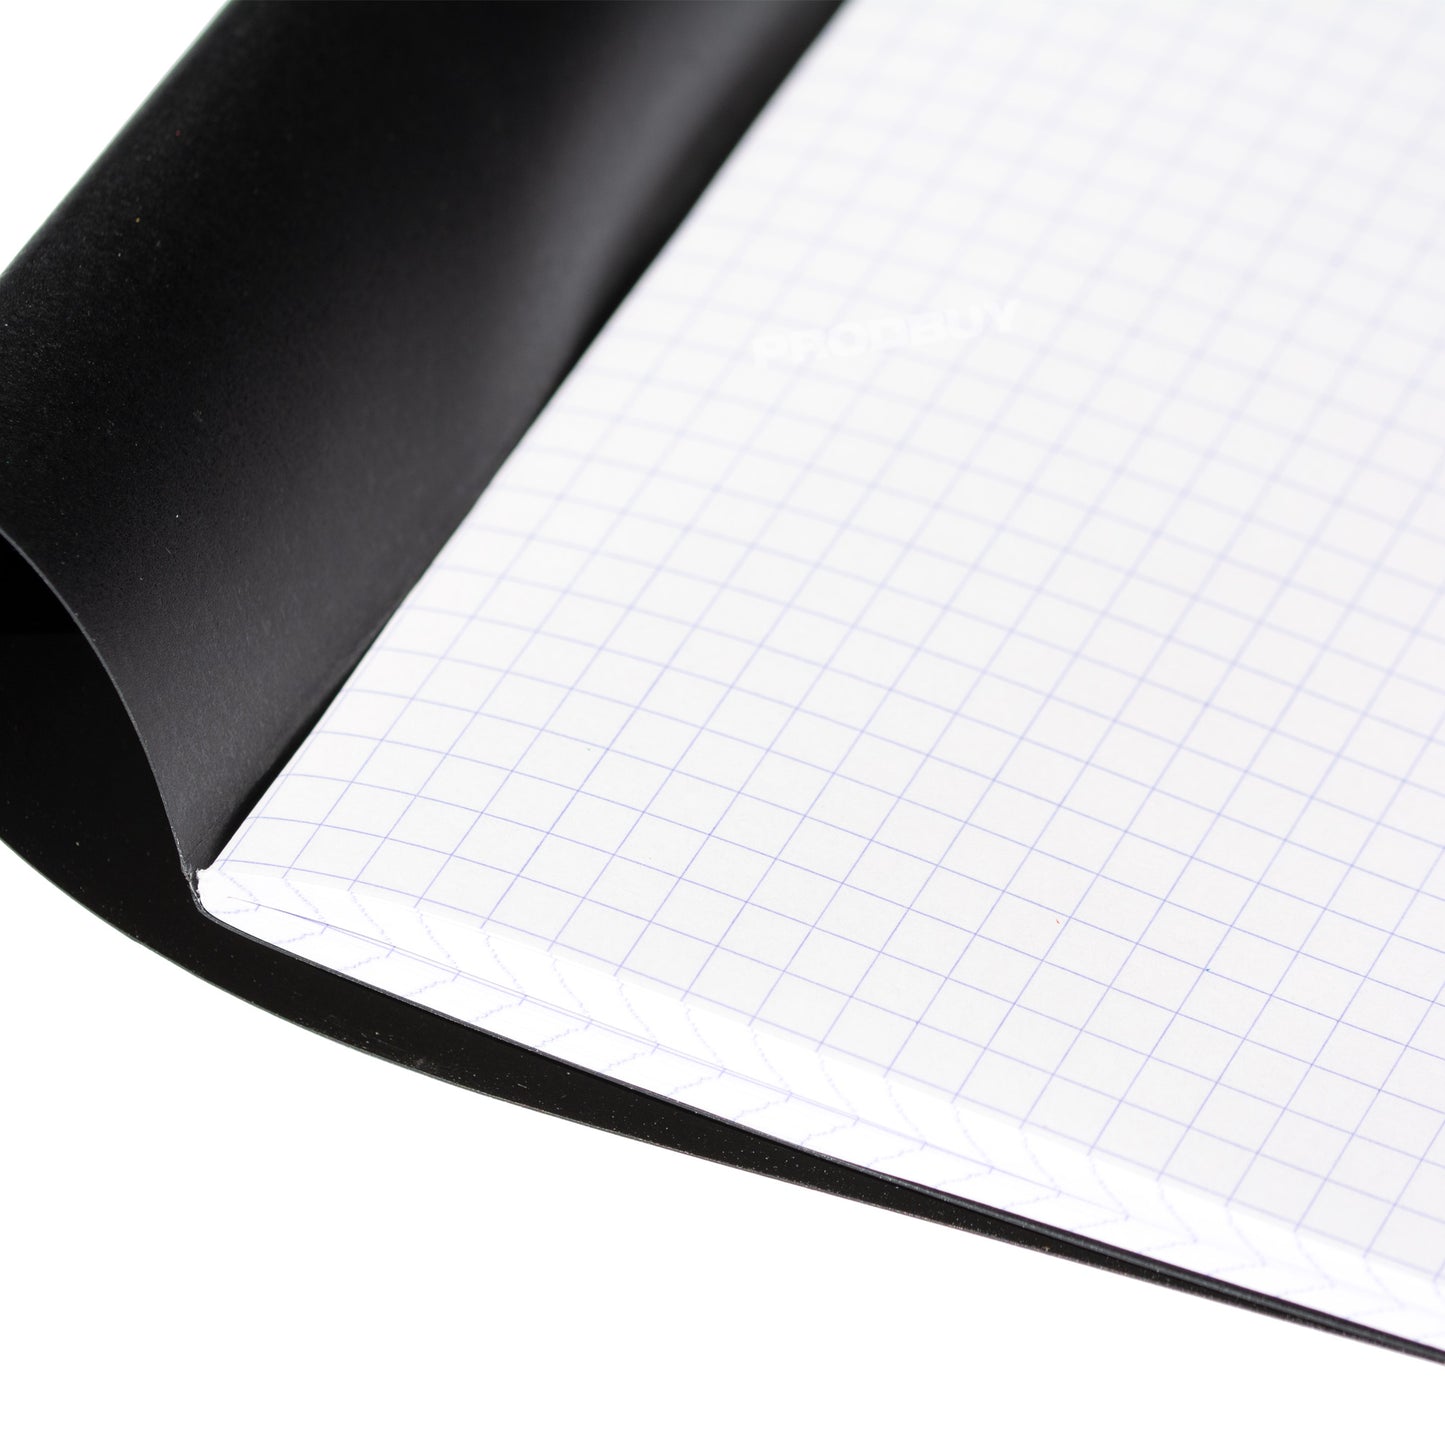 Rhodia A4 Graph Notebook with 5x5mm Square Pages & Black Cover